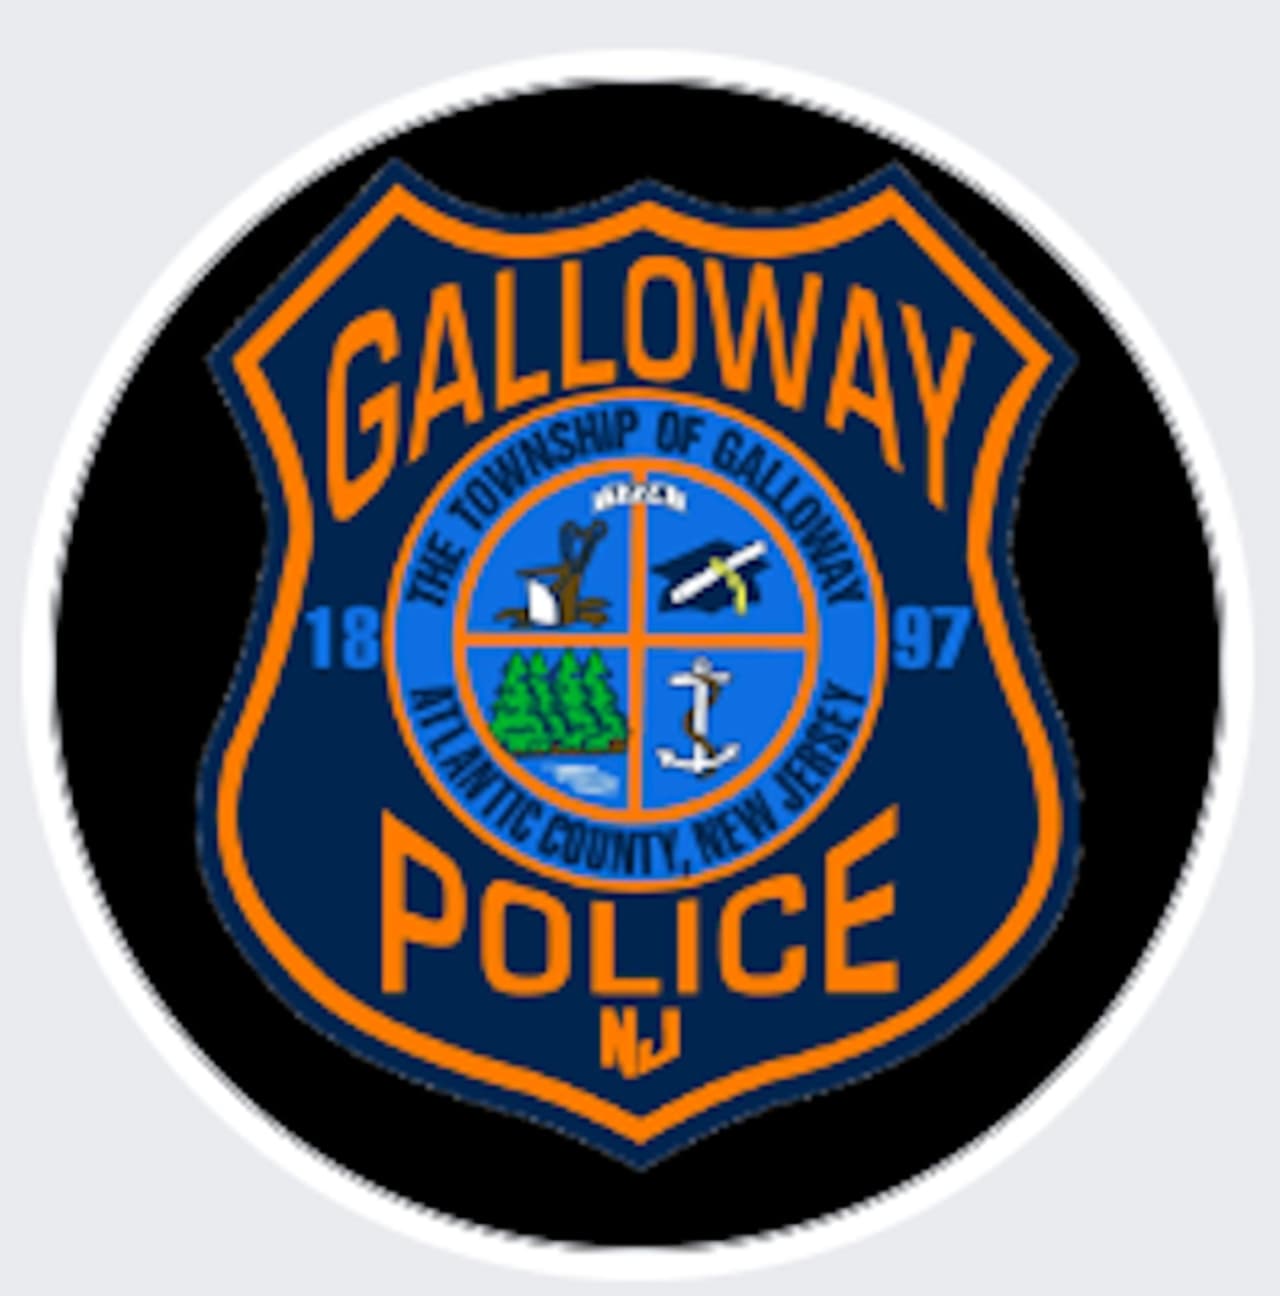 Galloway police made an arrest in a fatal hit-and-run crash.